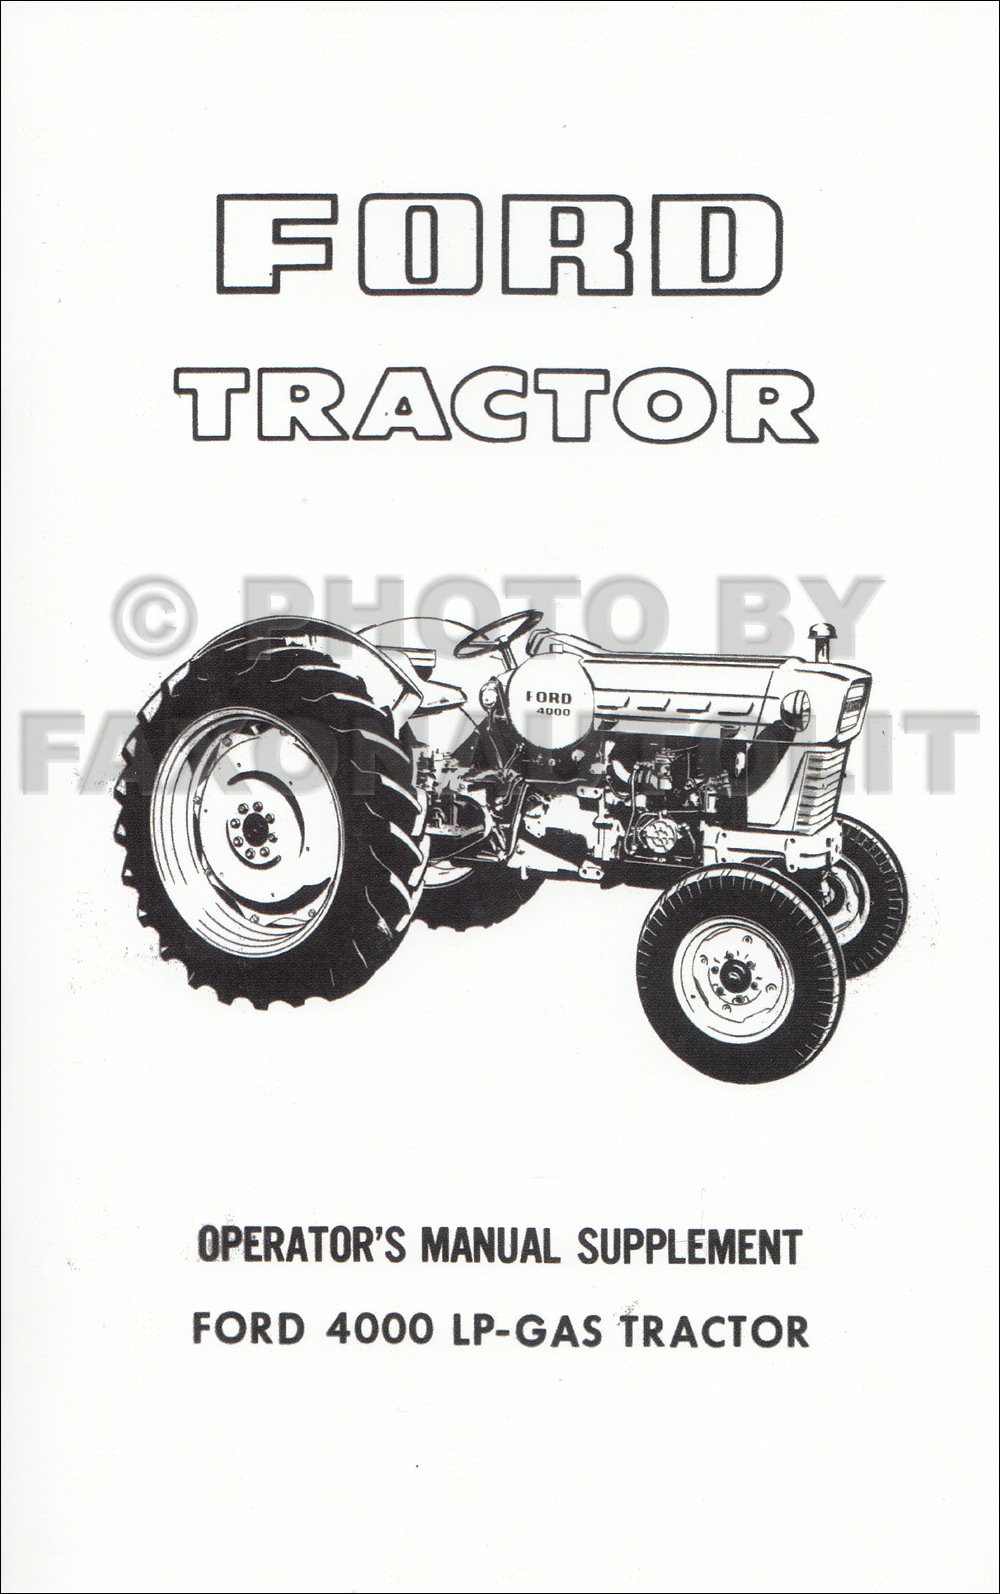 1965-1975 Ford LP-Gas 4000 Tractor Owner's Manual Supplement Reprint